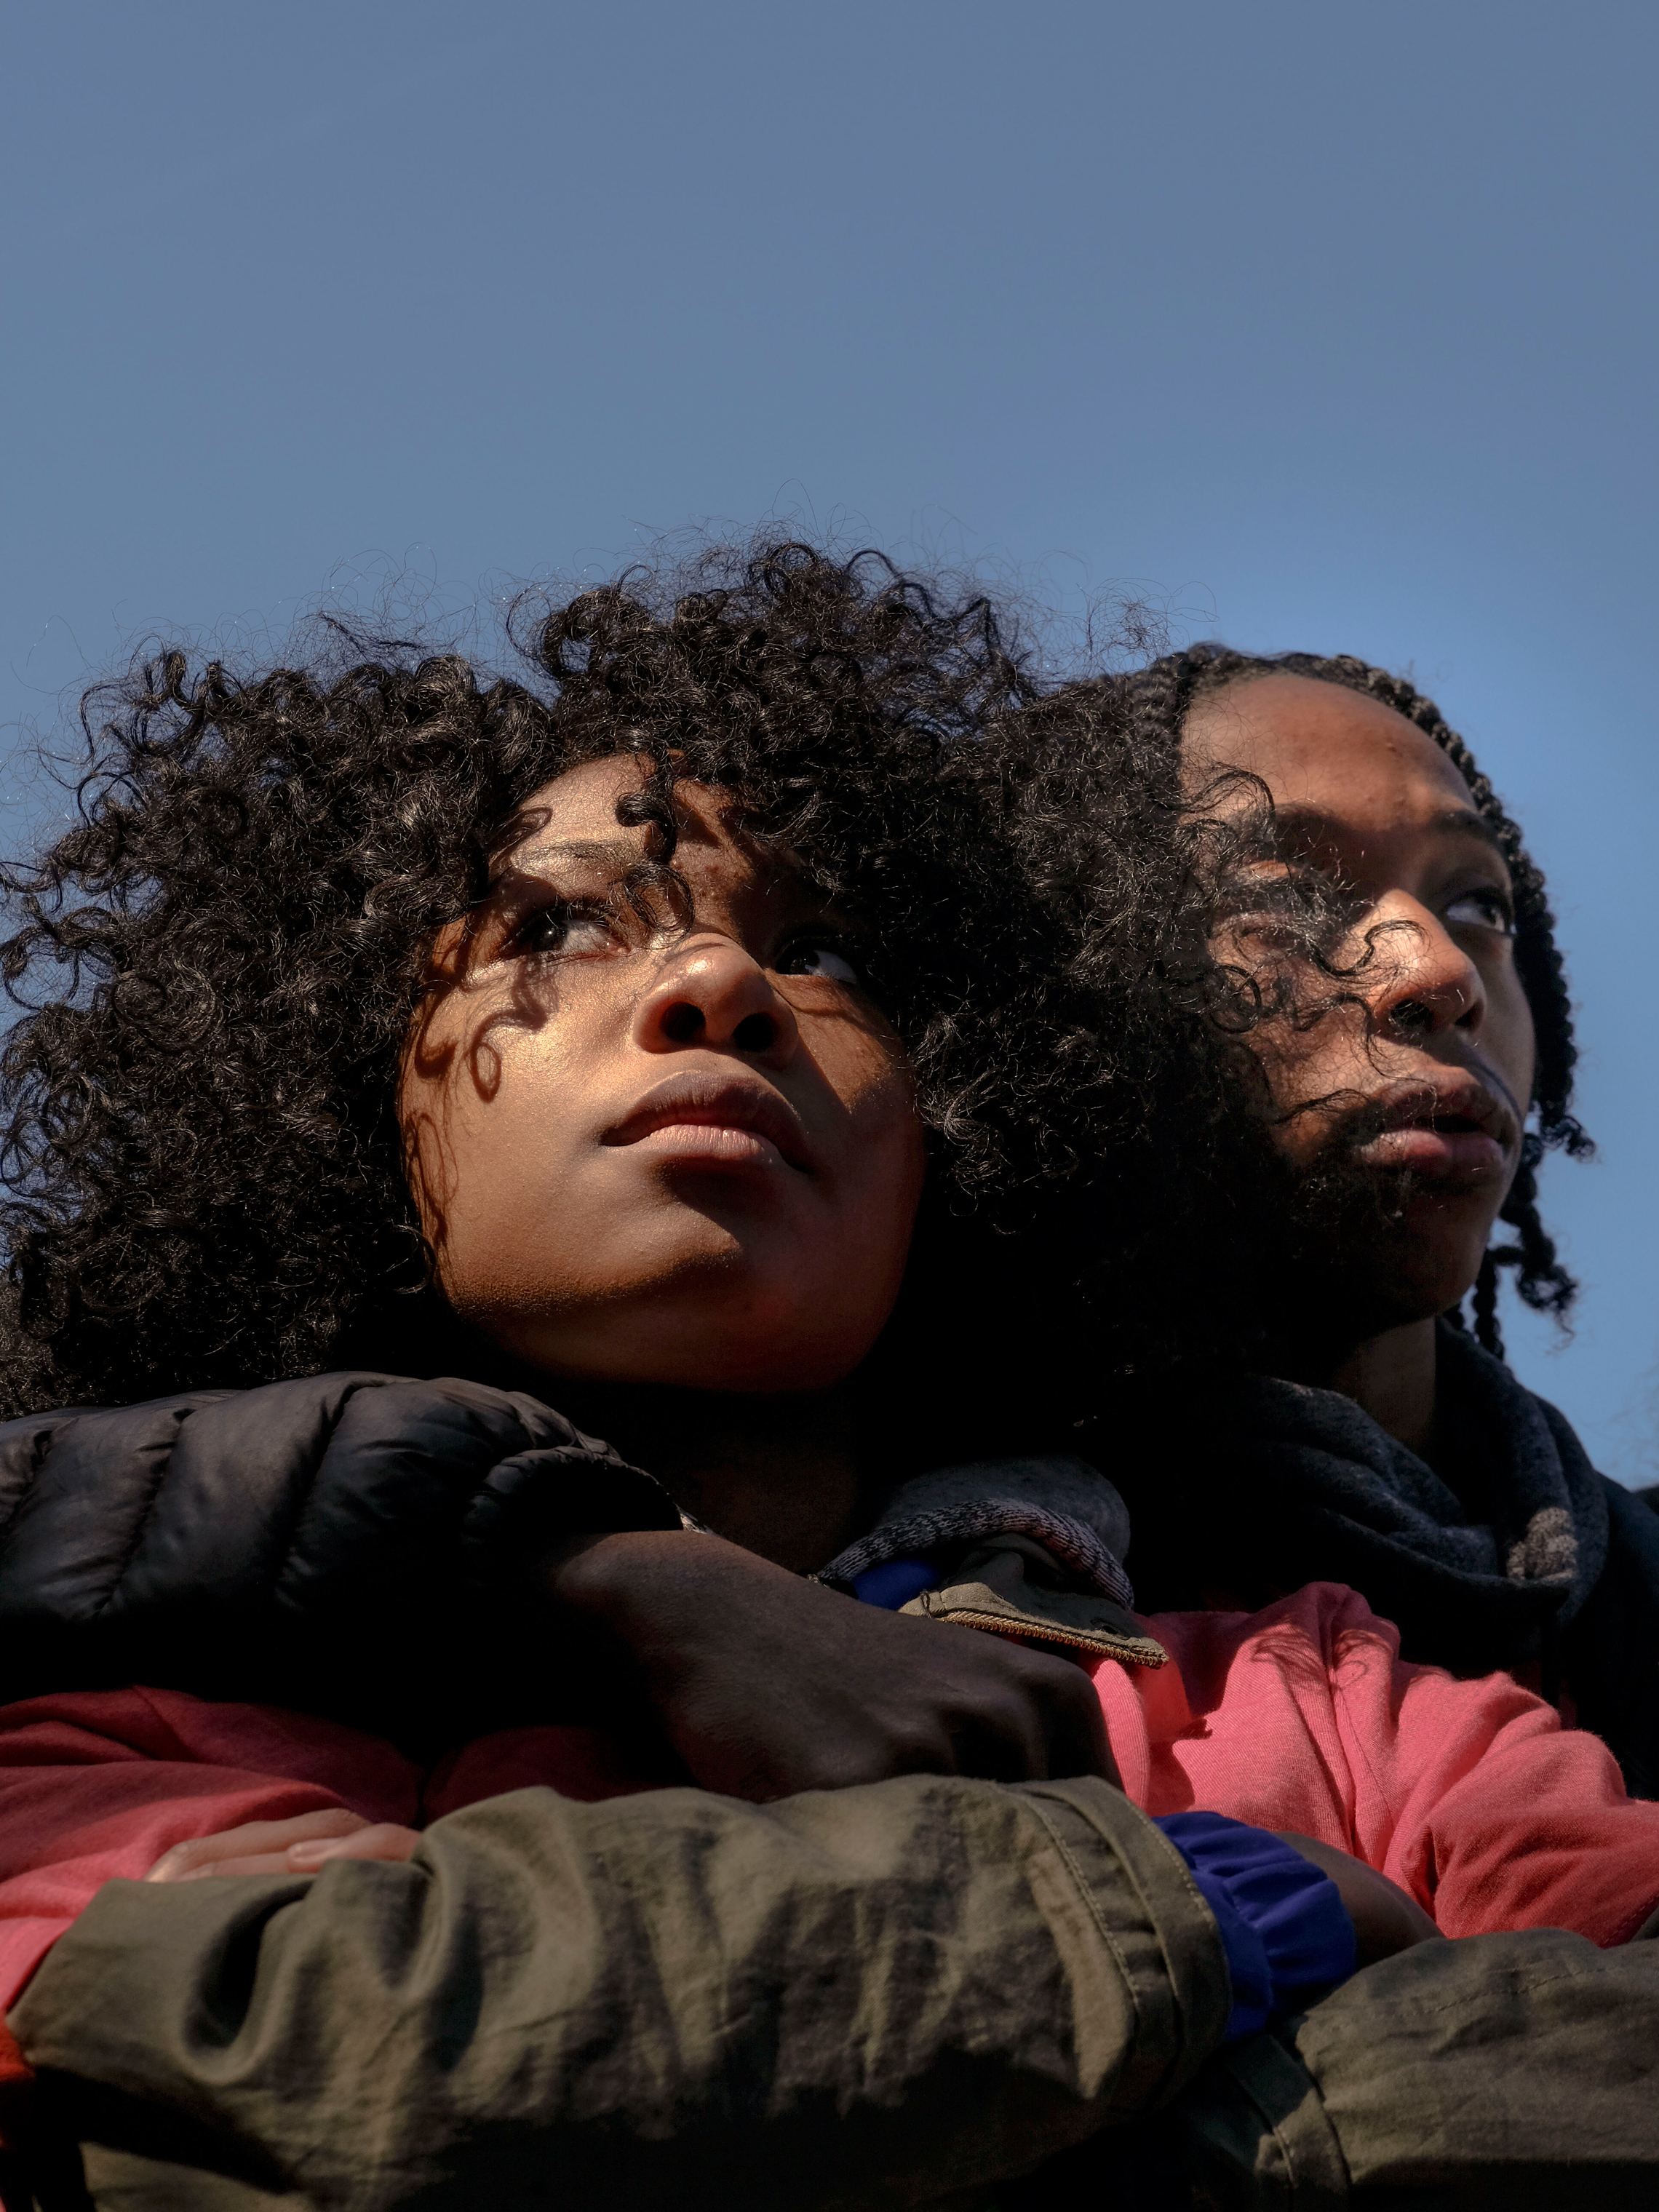 Jada Wright, 17, and Carl Payne, 18, from Eastern Senior High School in D.C. (Gabriella Demczuk for TIME)